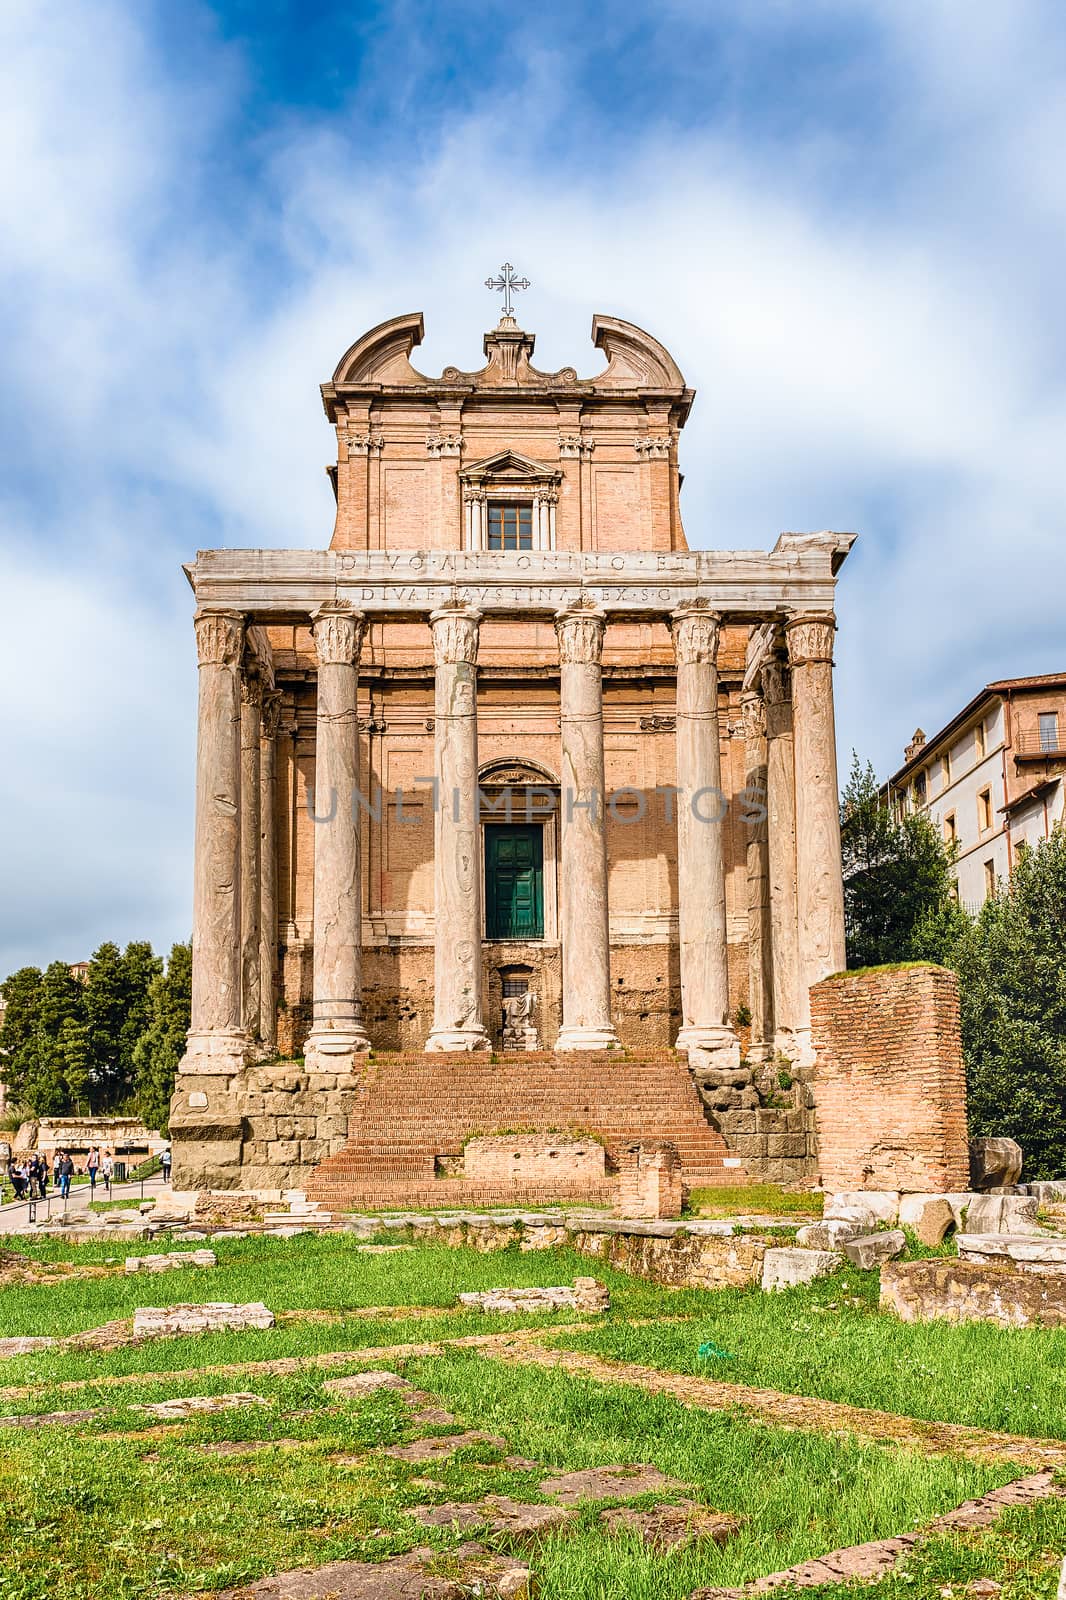 Ruins of the Temple of Antoninus and Faustina in Rome, Italy by marcorubino